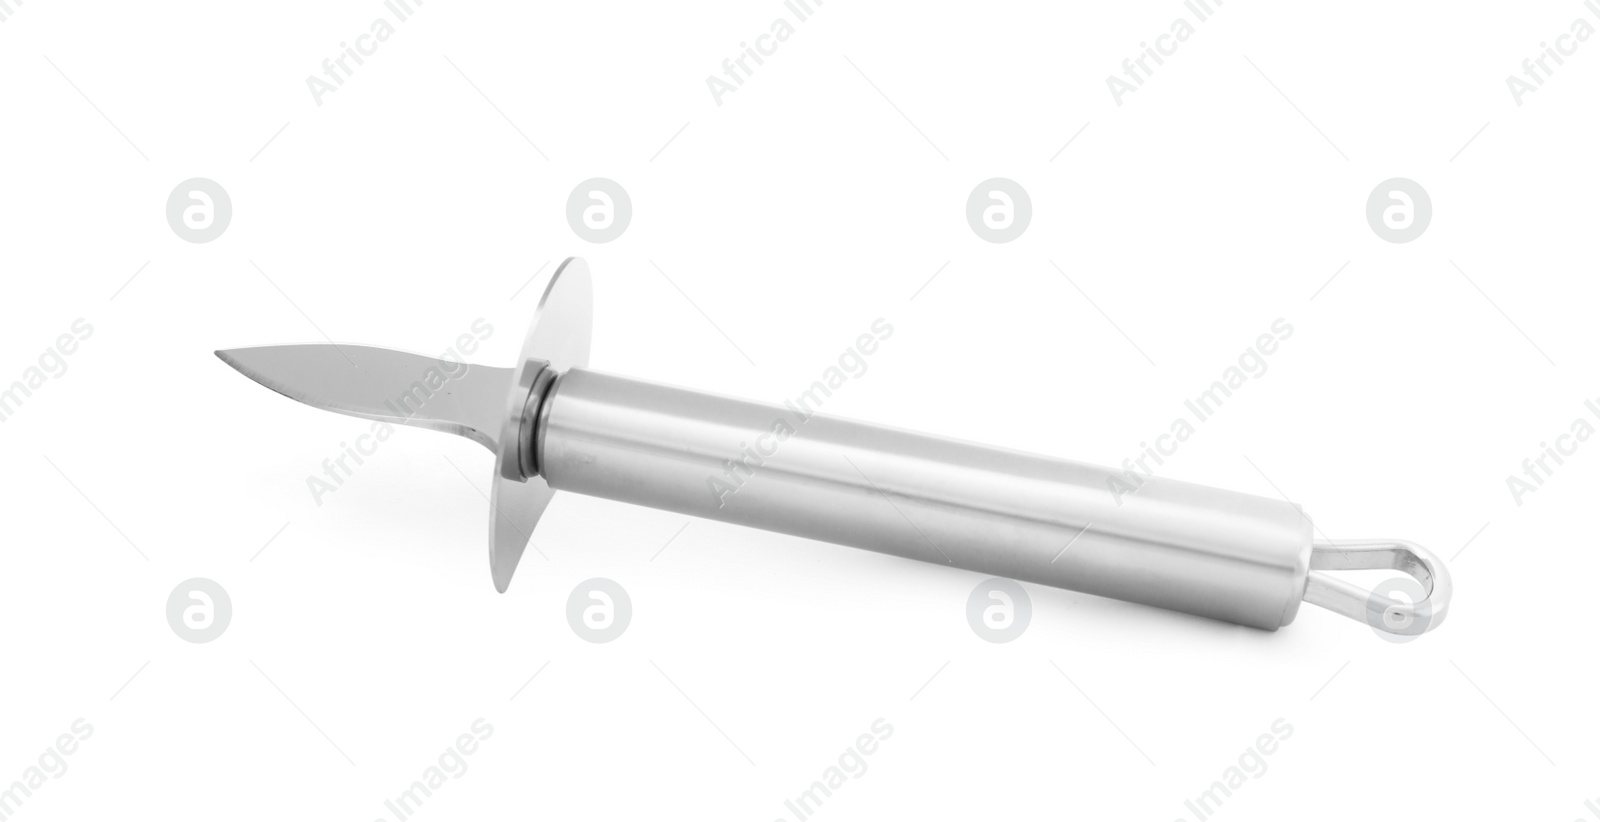 Photo of Oyster knife with black handle isolated on white